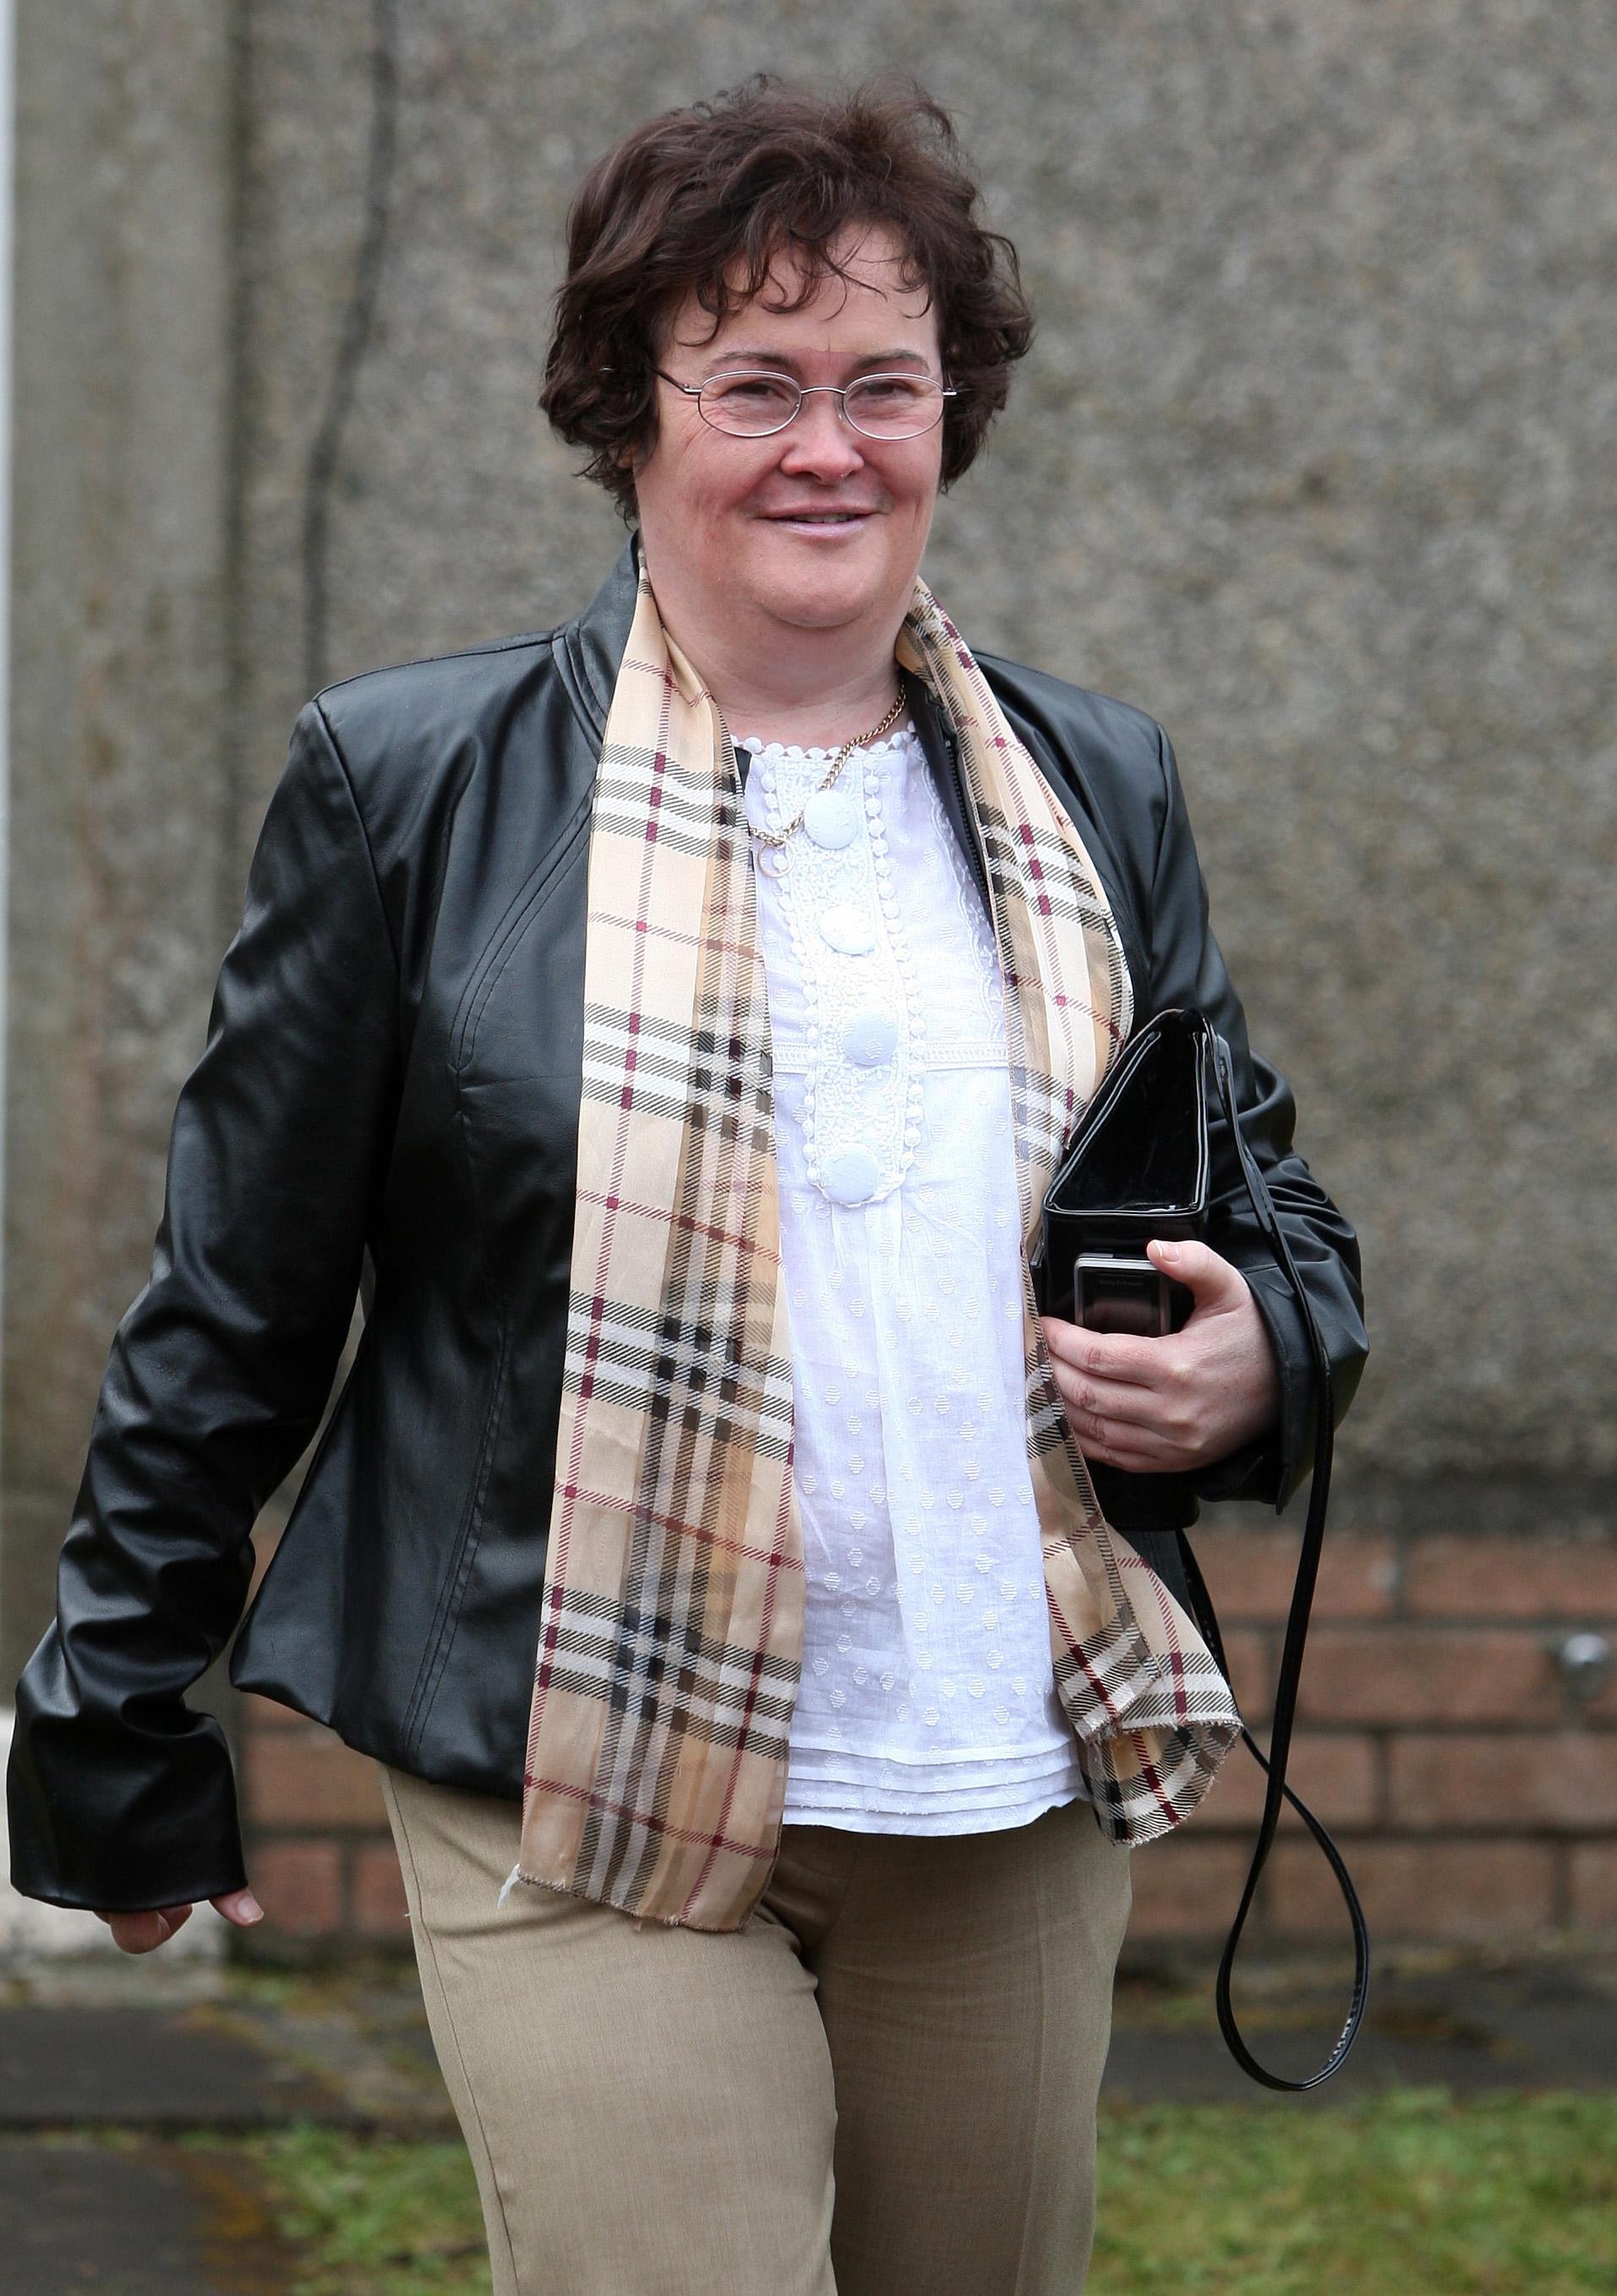 Britain's Got Talent star Susan Boyle, sporting a new look after undergoing a makeover, outside her home in Blackburn, West Lothian. | Source: Getty Images